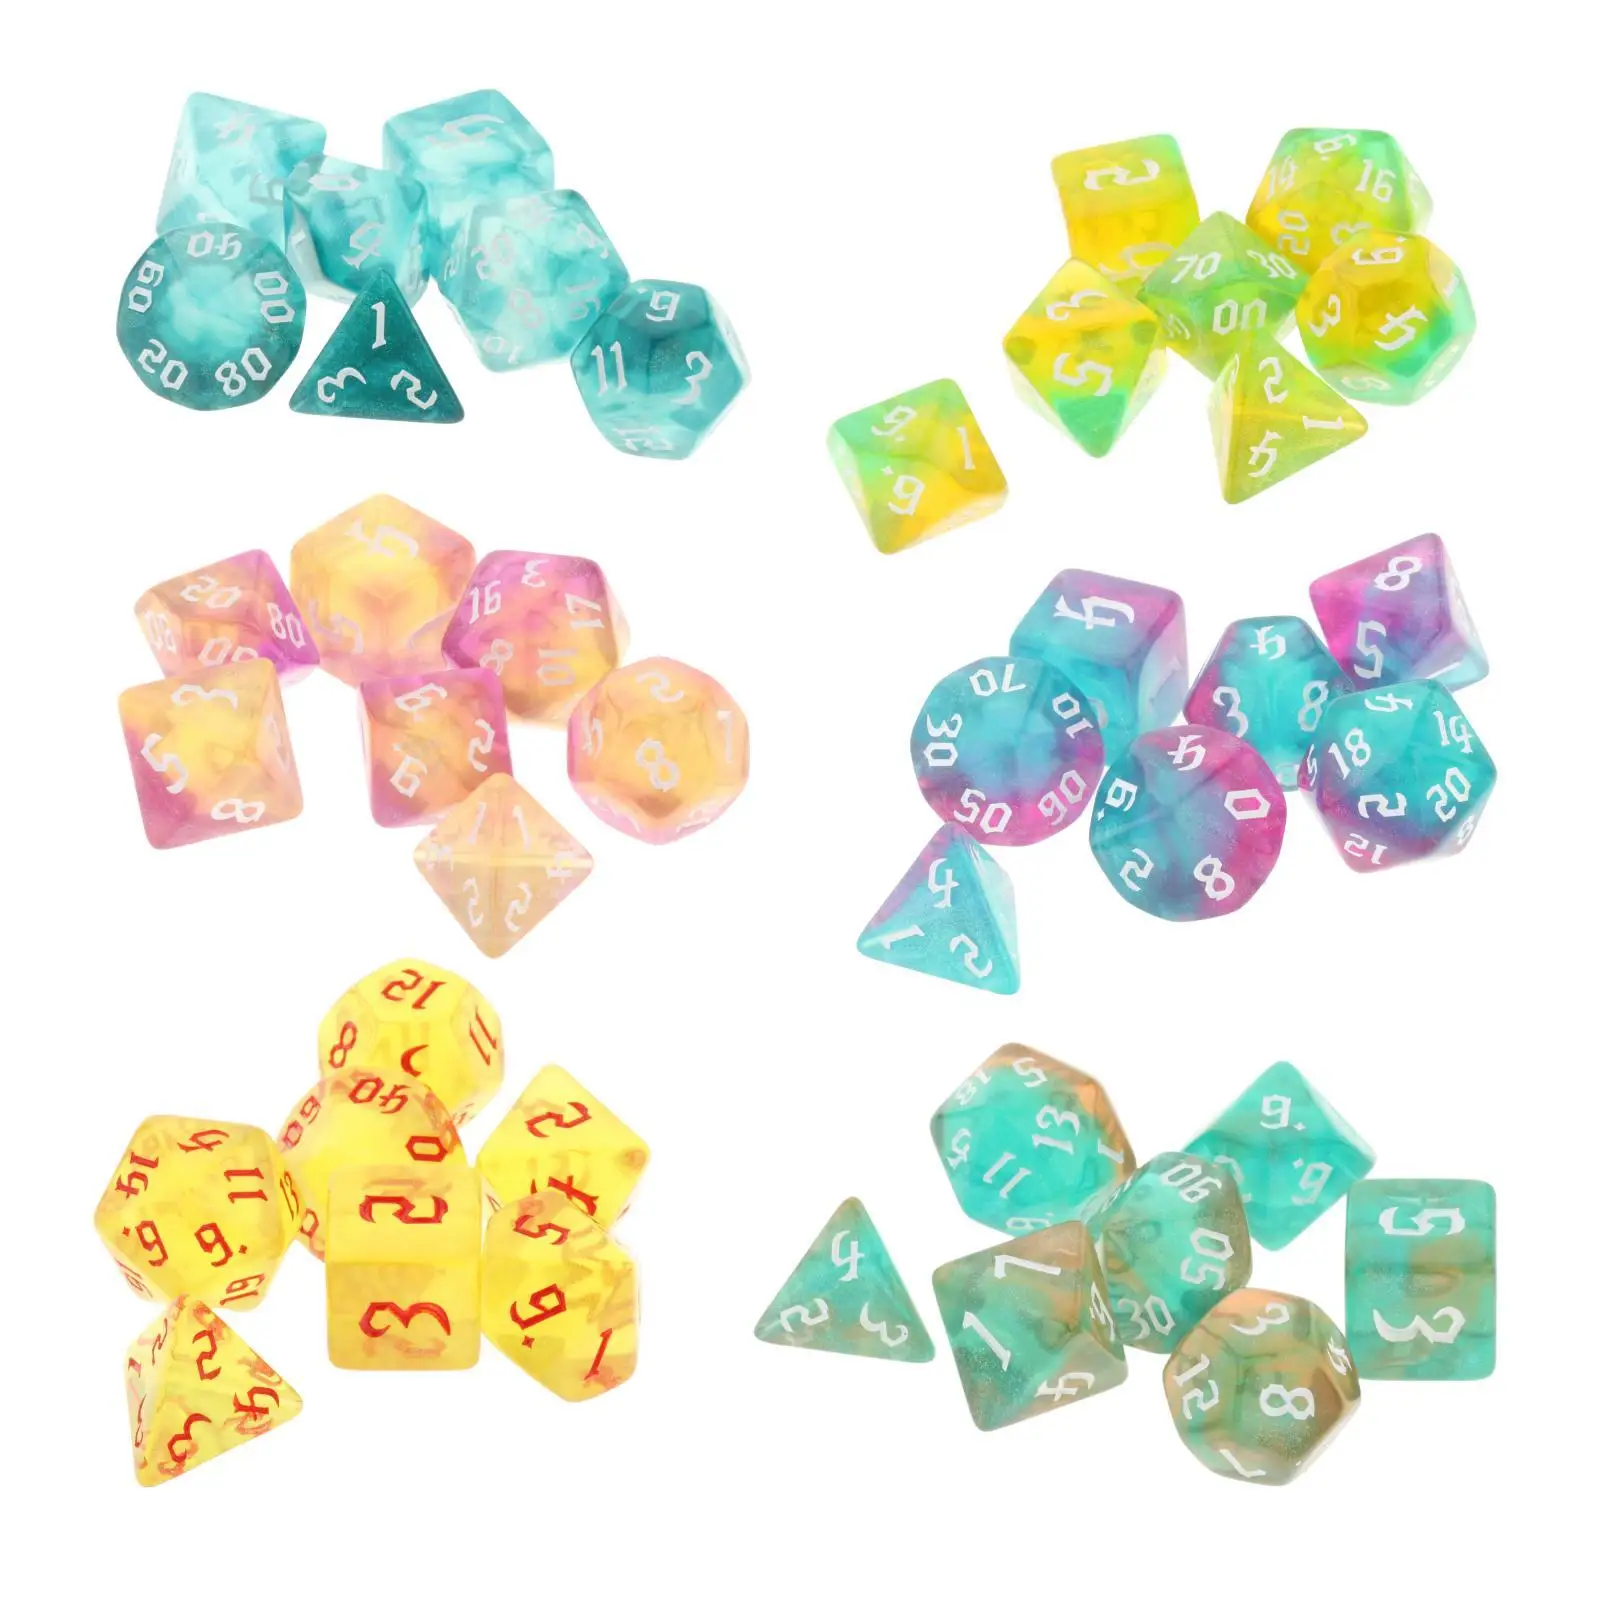 7pieces Multi-Side Dice Polyhedral Dice Set Educational Toys Accessaries